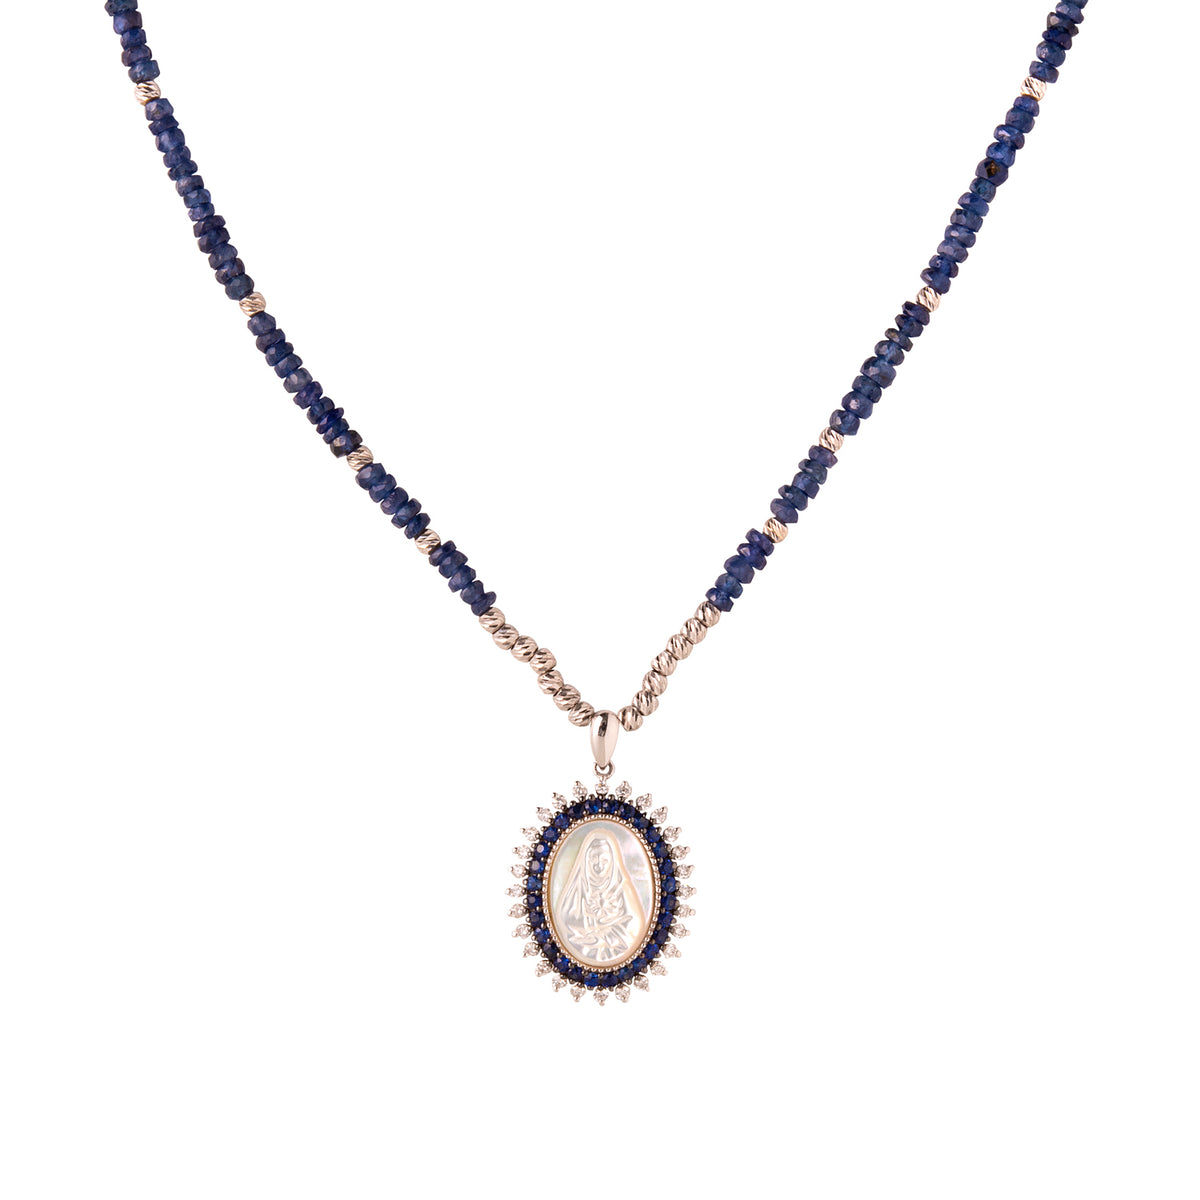 Gold necklace with sapphire beads and Madonna sapphire with diamonds pendant.